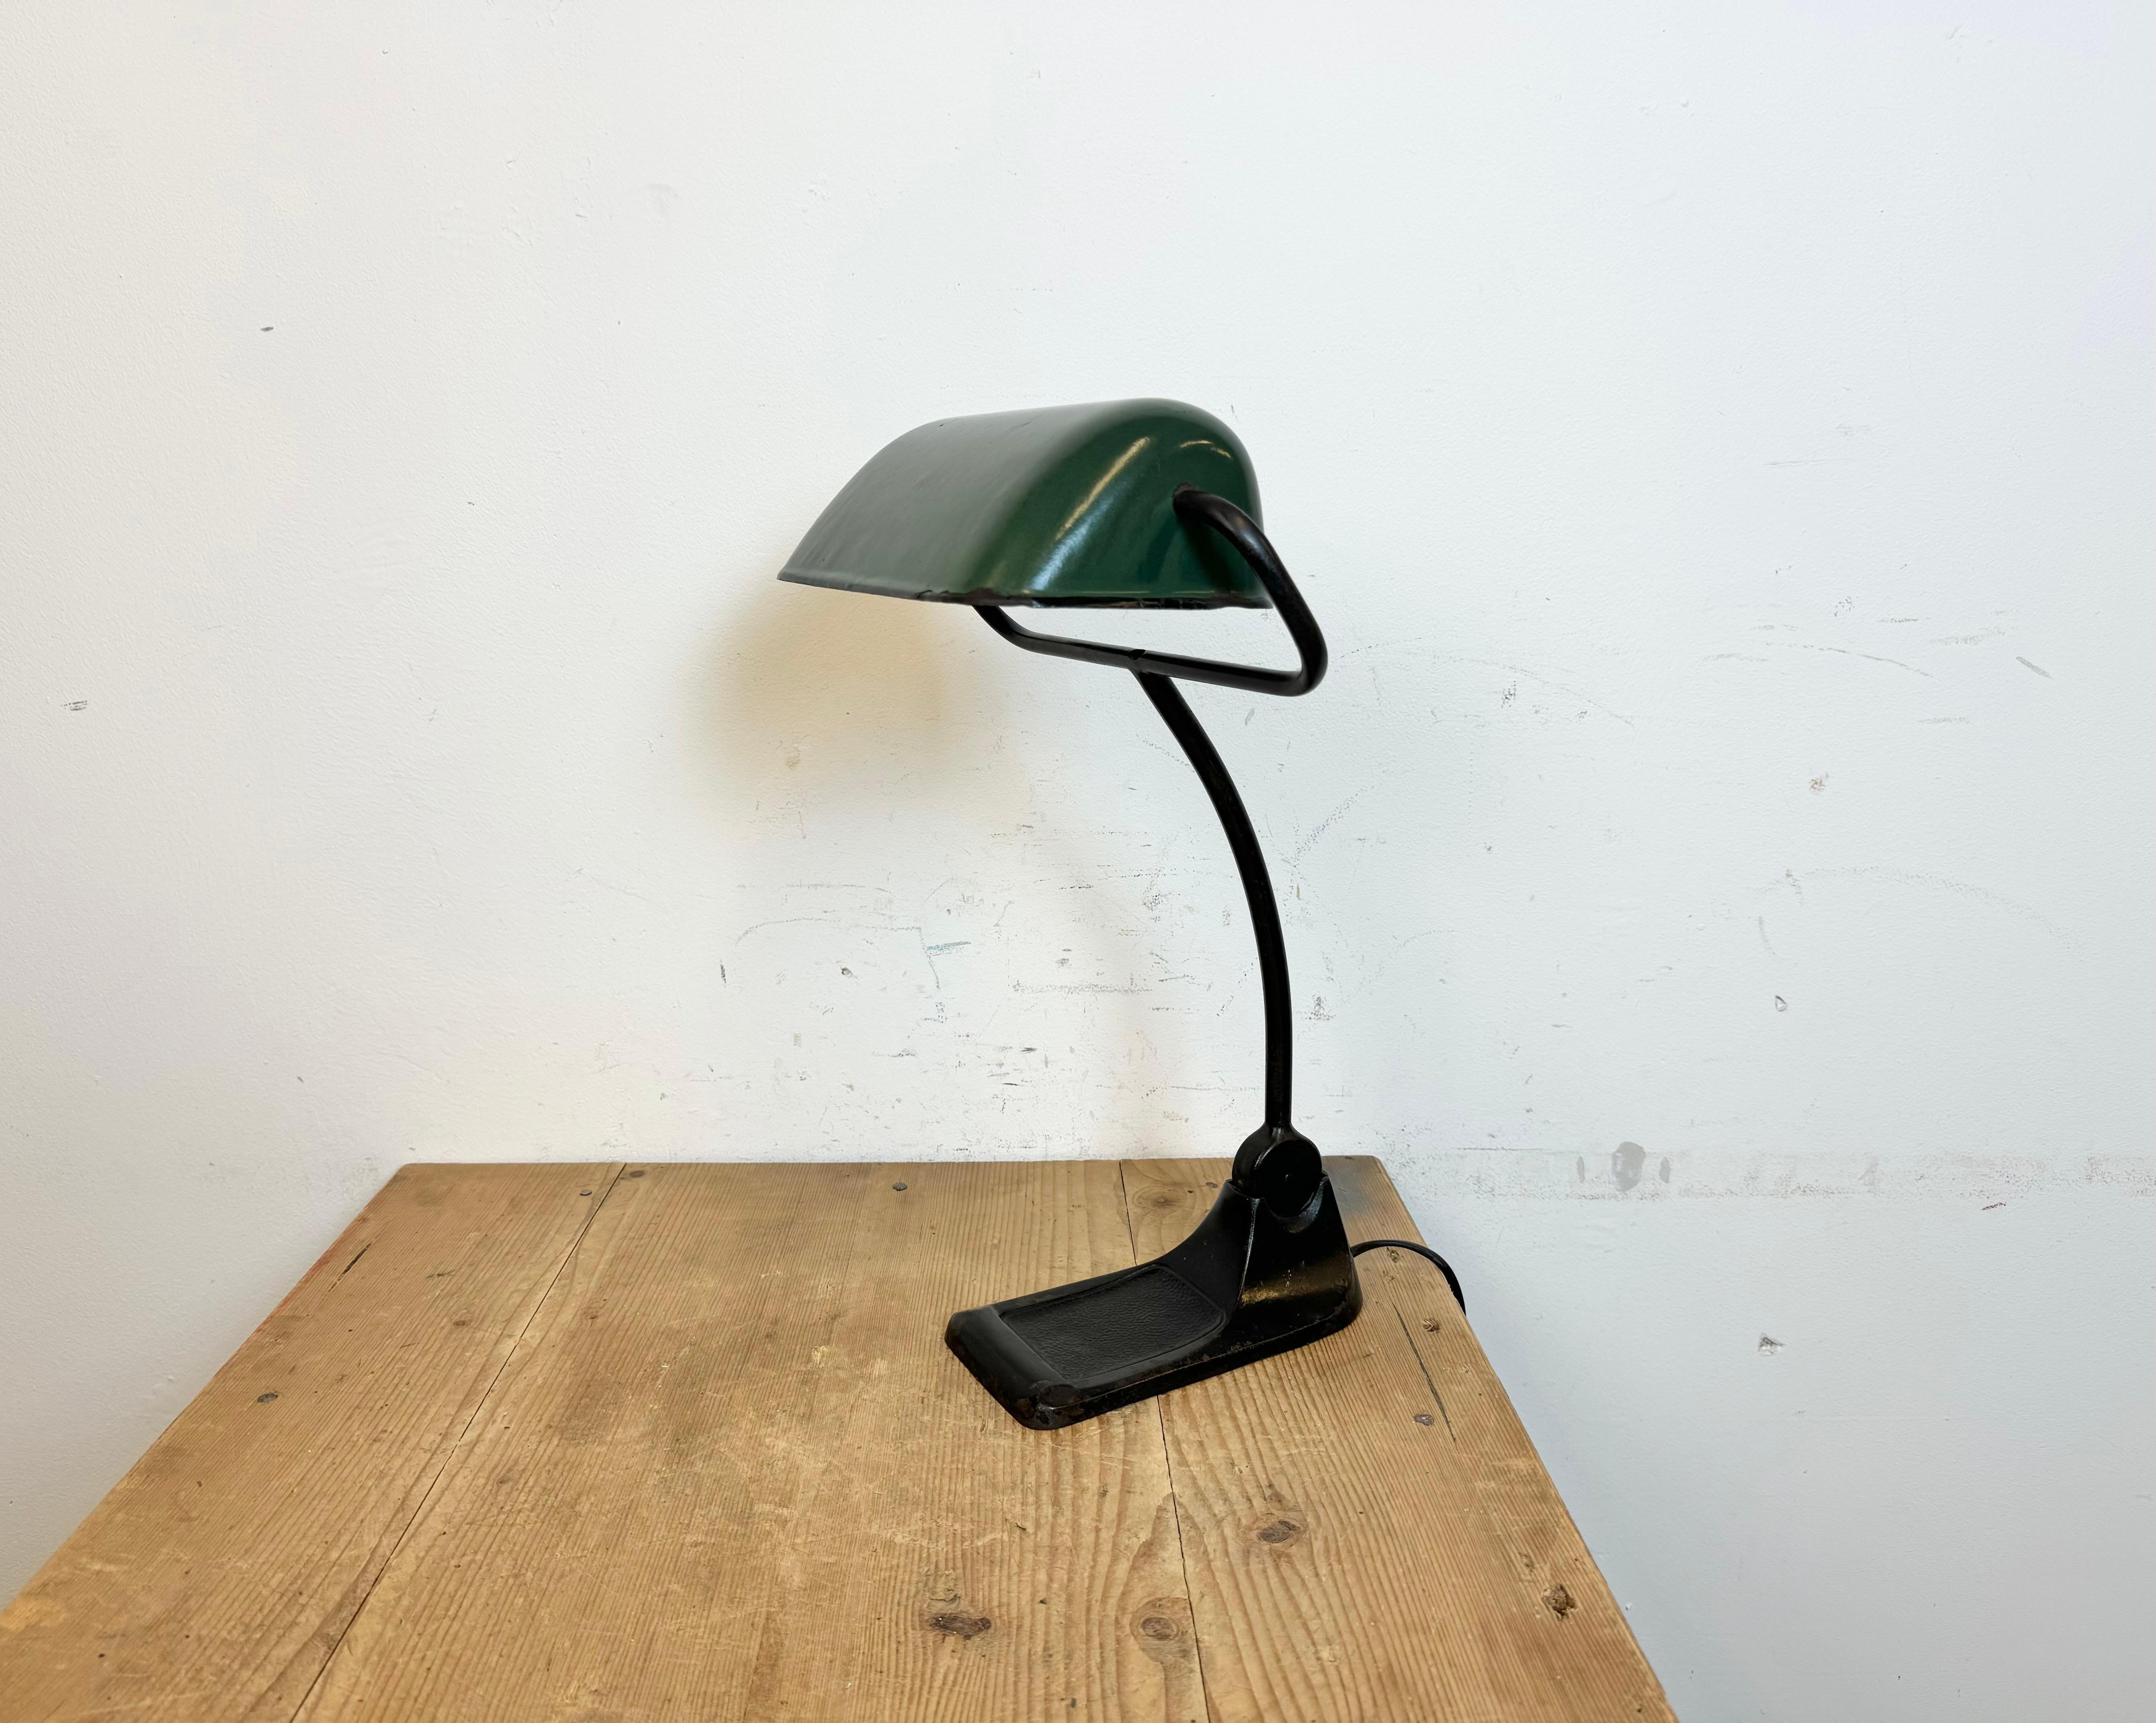 Vintage green enamel bauhaus table lamp made by BUR ( Bünte und Remmler ) in Germany during the 1930s. Cast iron base. Green enameled iron shade. White enameled interior. The arm and shade are adjustable. Porcelain socket requires standard E 27/E26